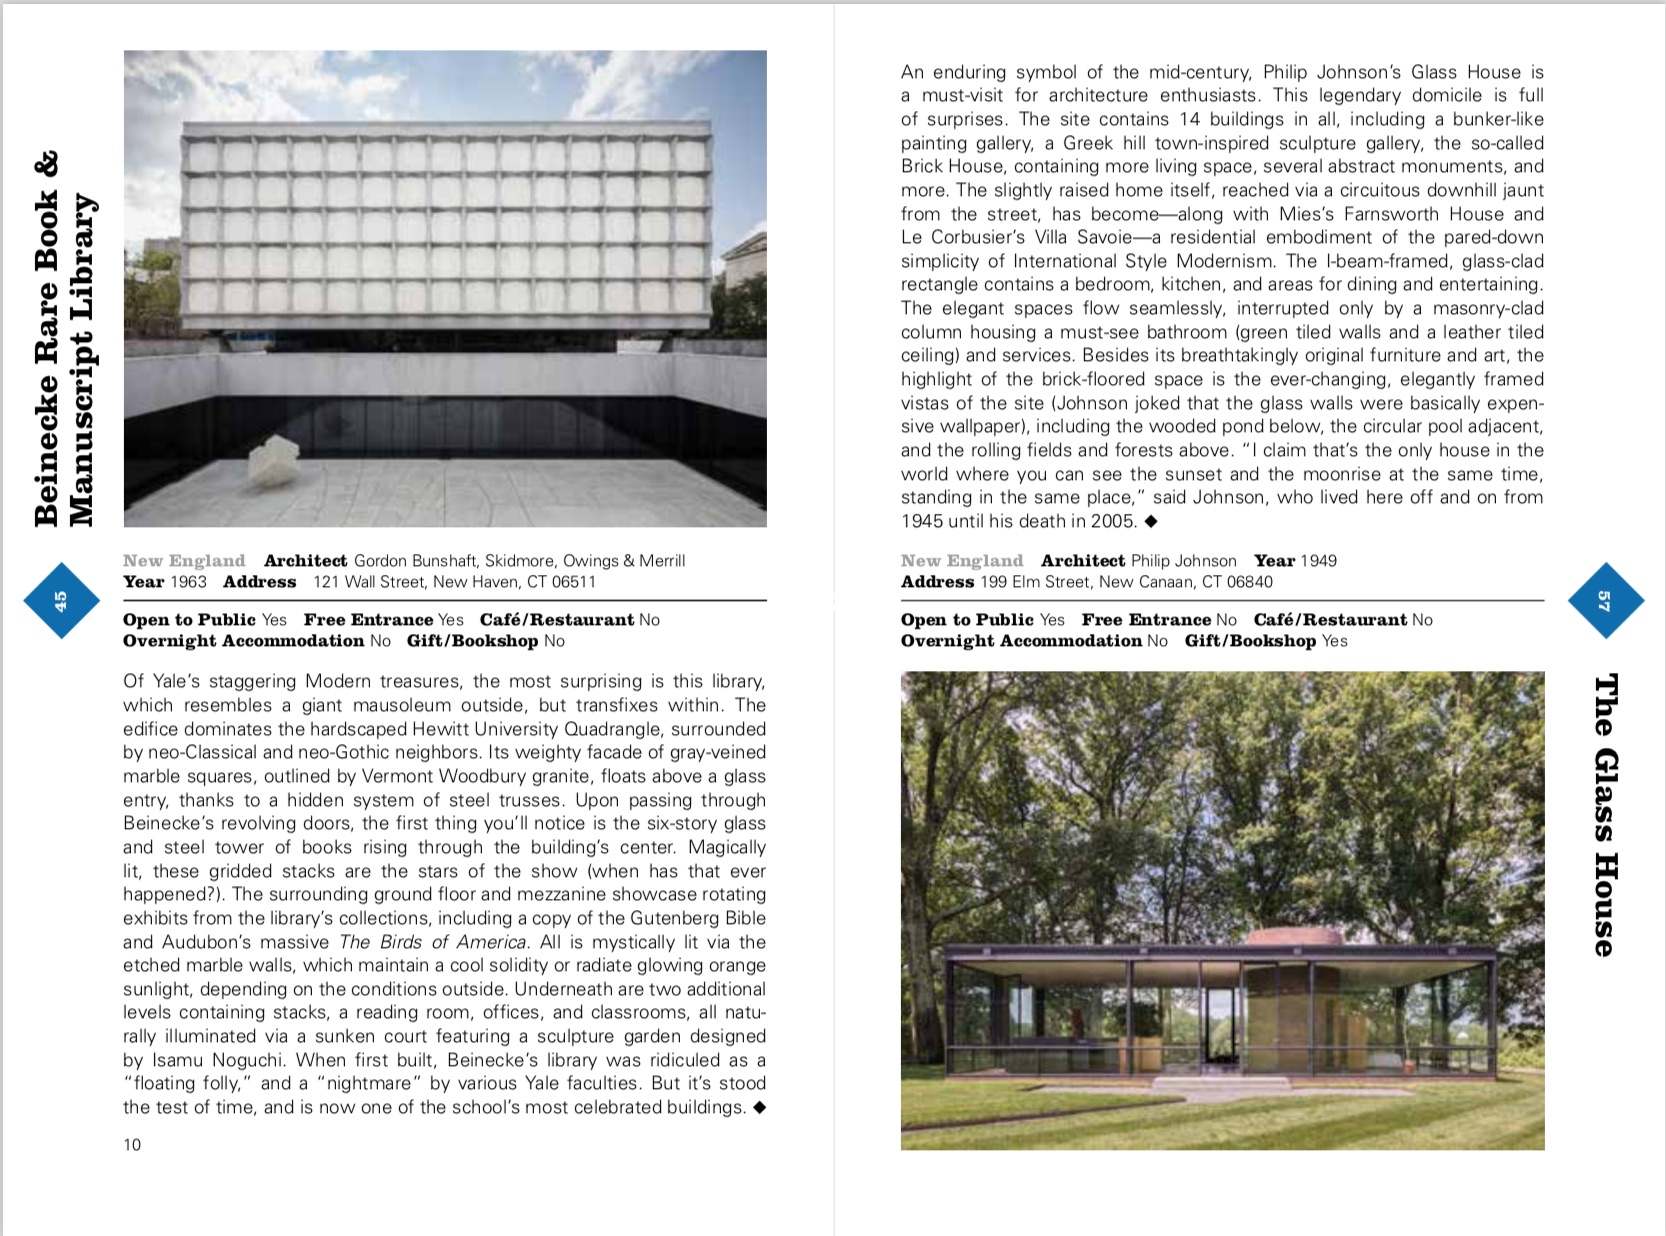 By Sam Lubell and Darren Bradley from Mid-Century Modern Architecture Travel Guide: East Coast USA copyright Phaidon 2018